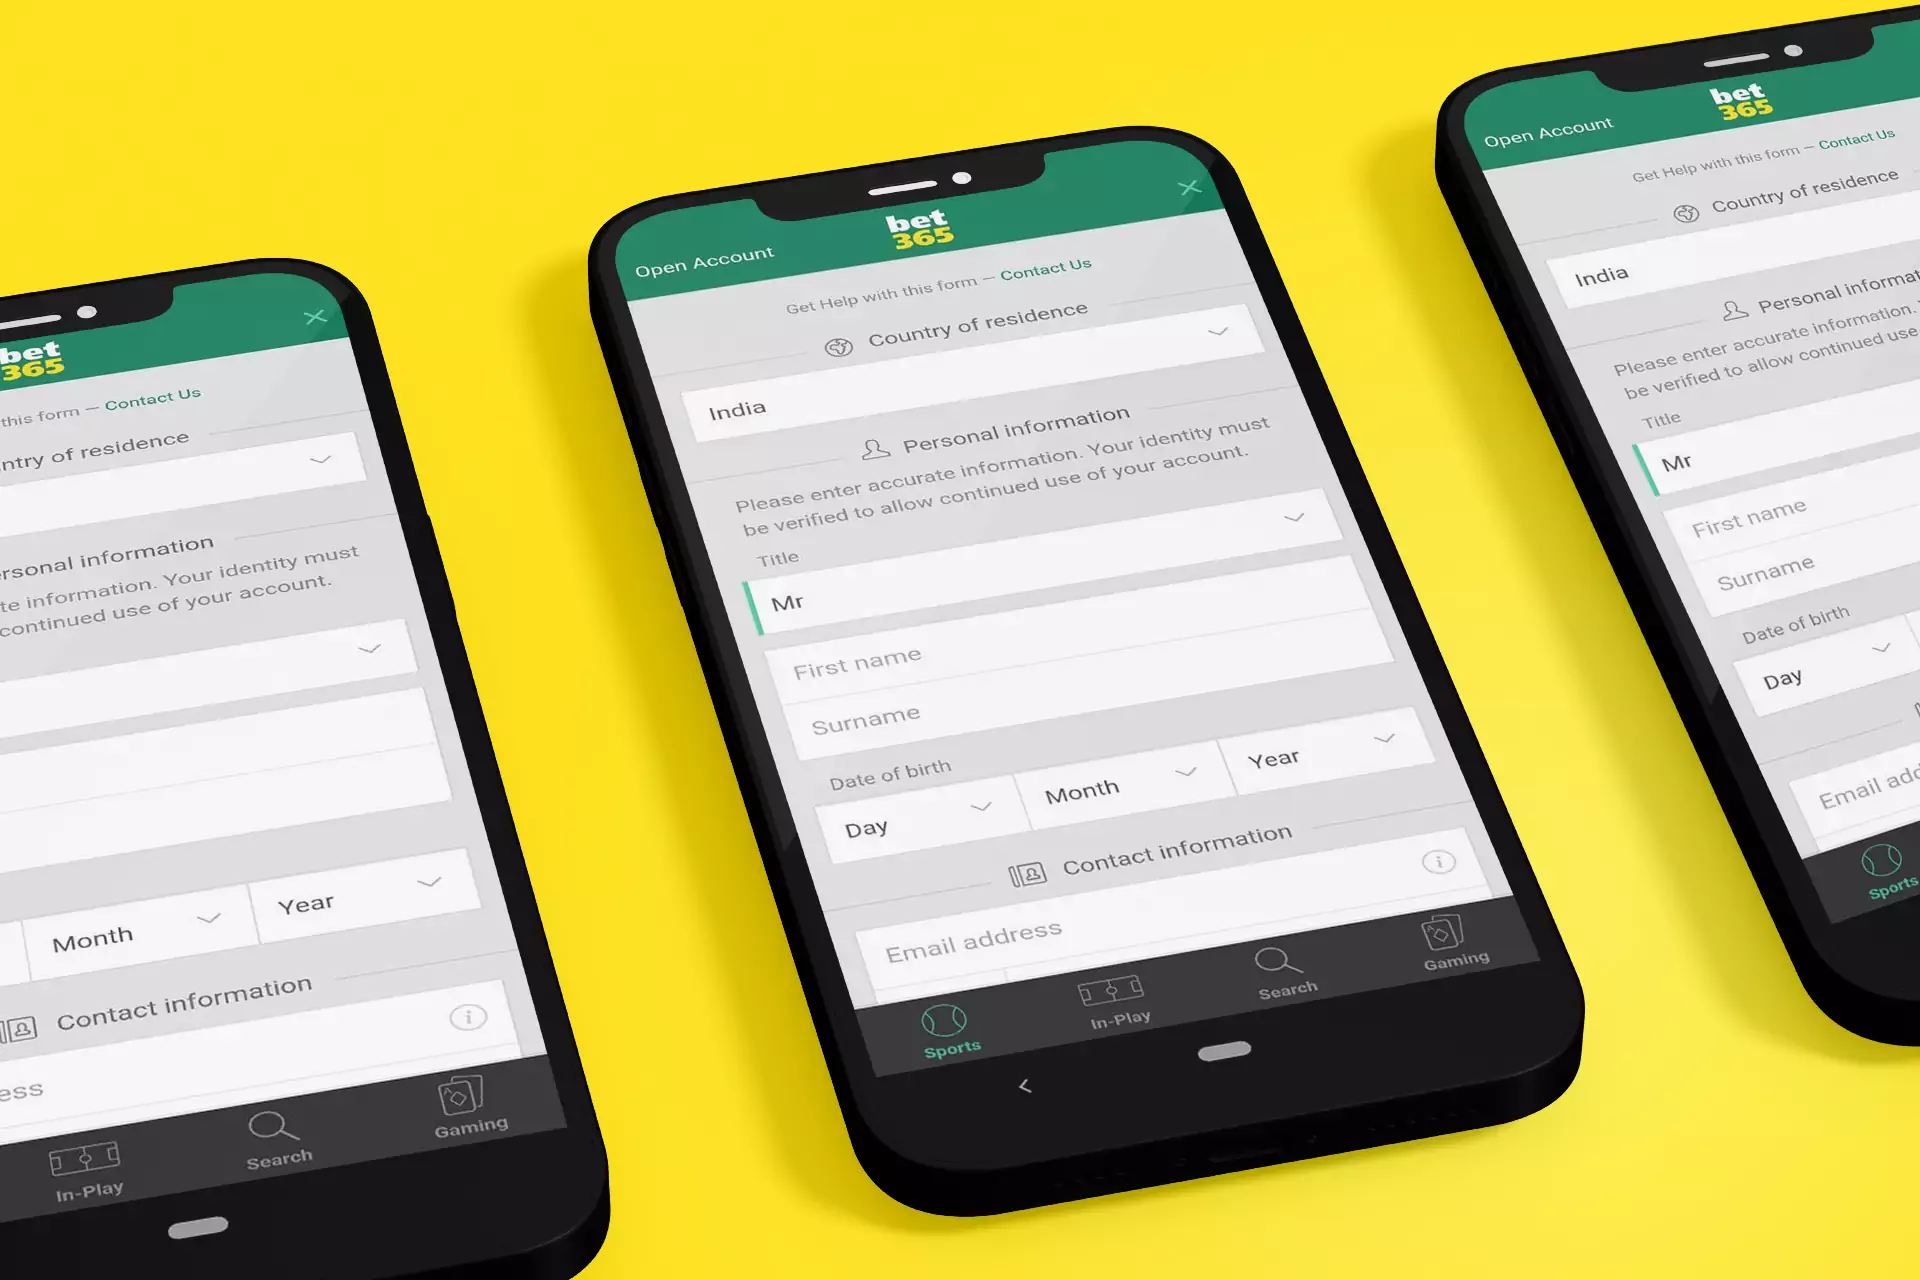 Run the app of Bet365 and create a new account.